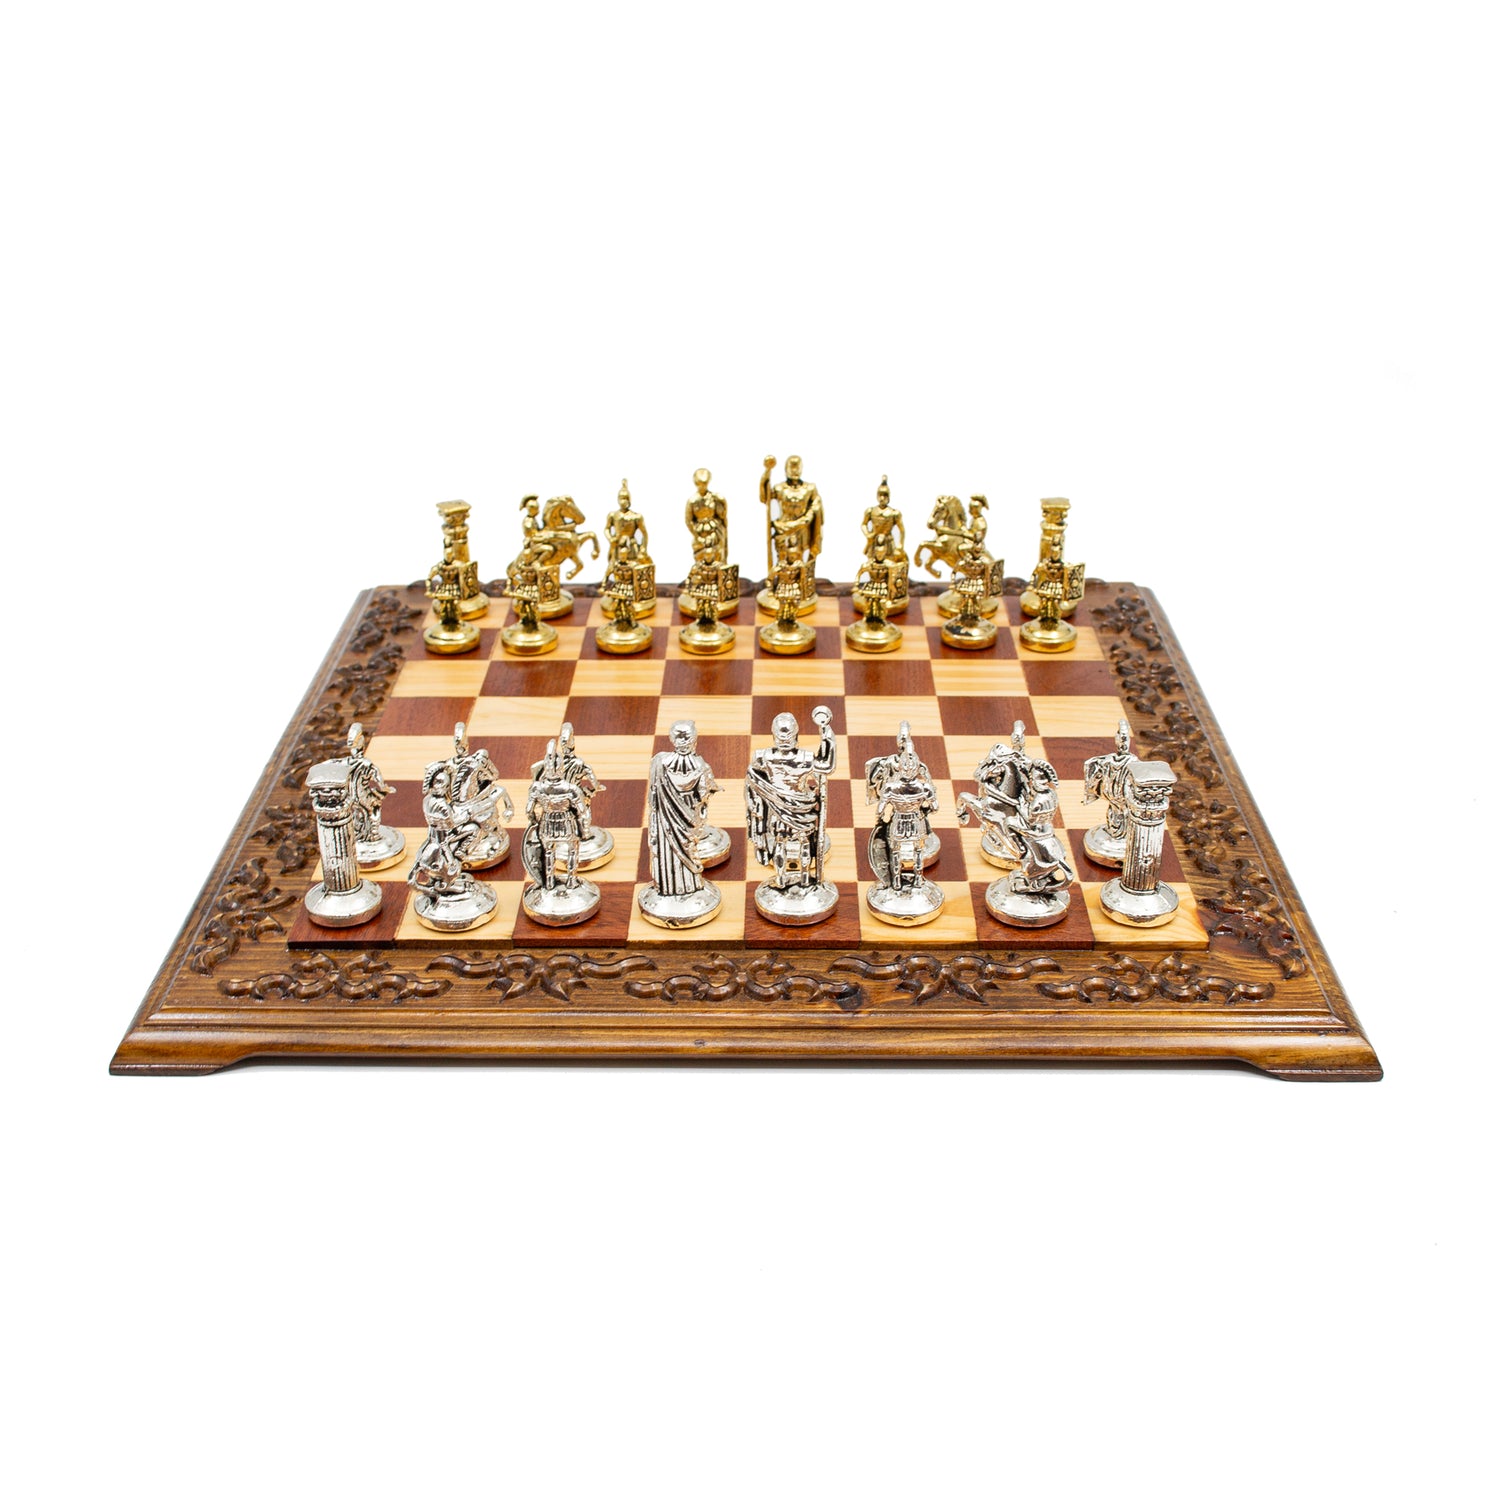 Walnut Chess Board: Silver and Gold Classic Pieces - Ketohandcraft